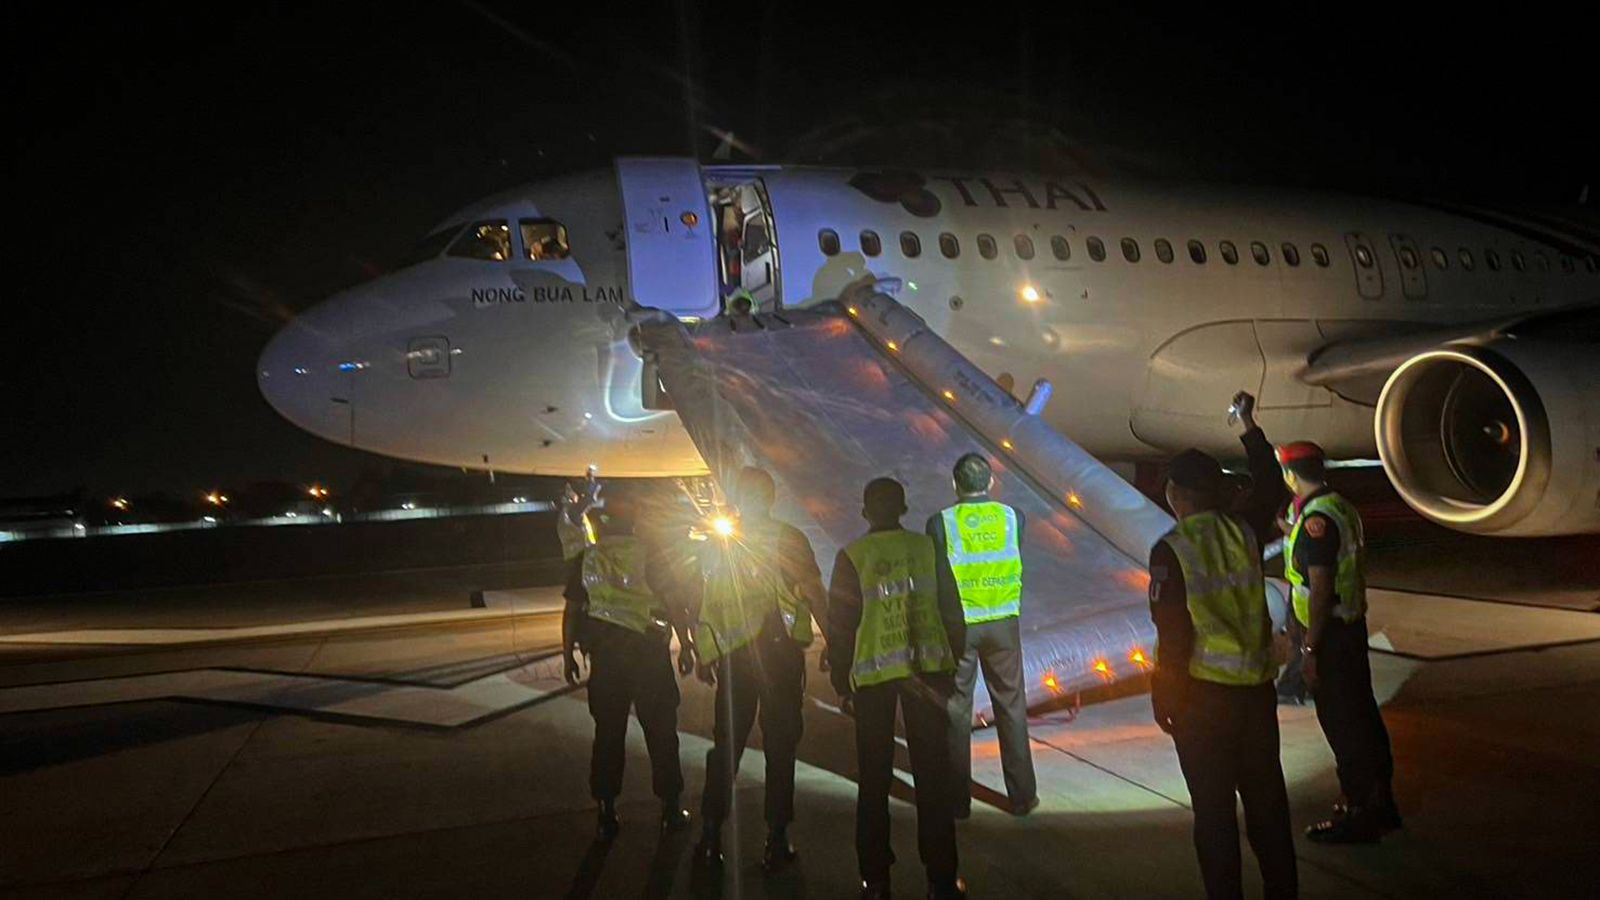 Airport staff respond to a passenger-related incident at Chiang Mai International Airport in Thailand on February 7.